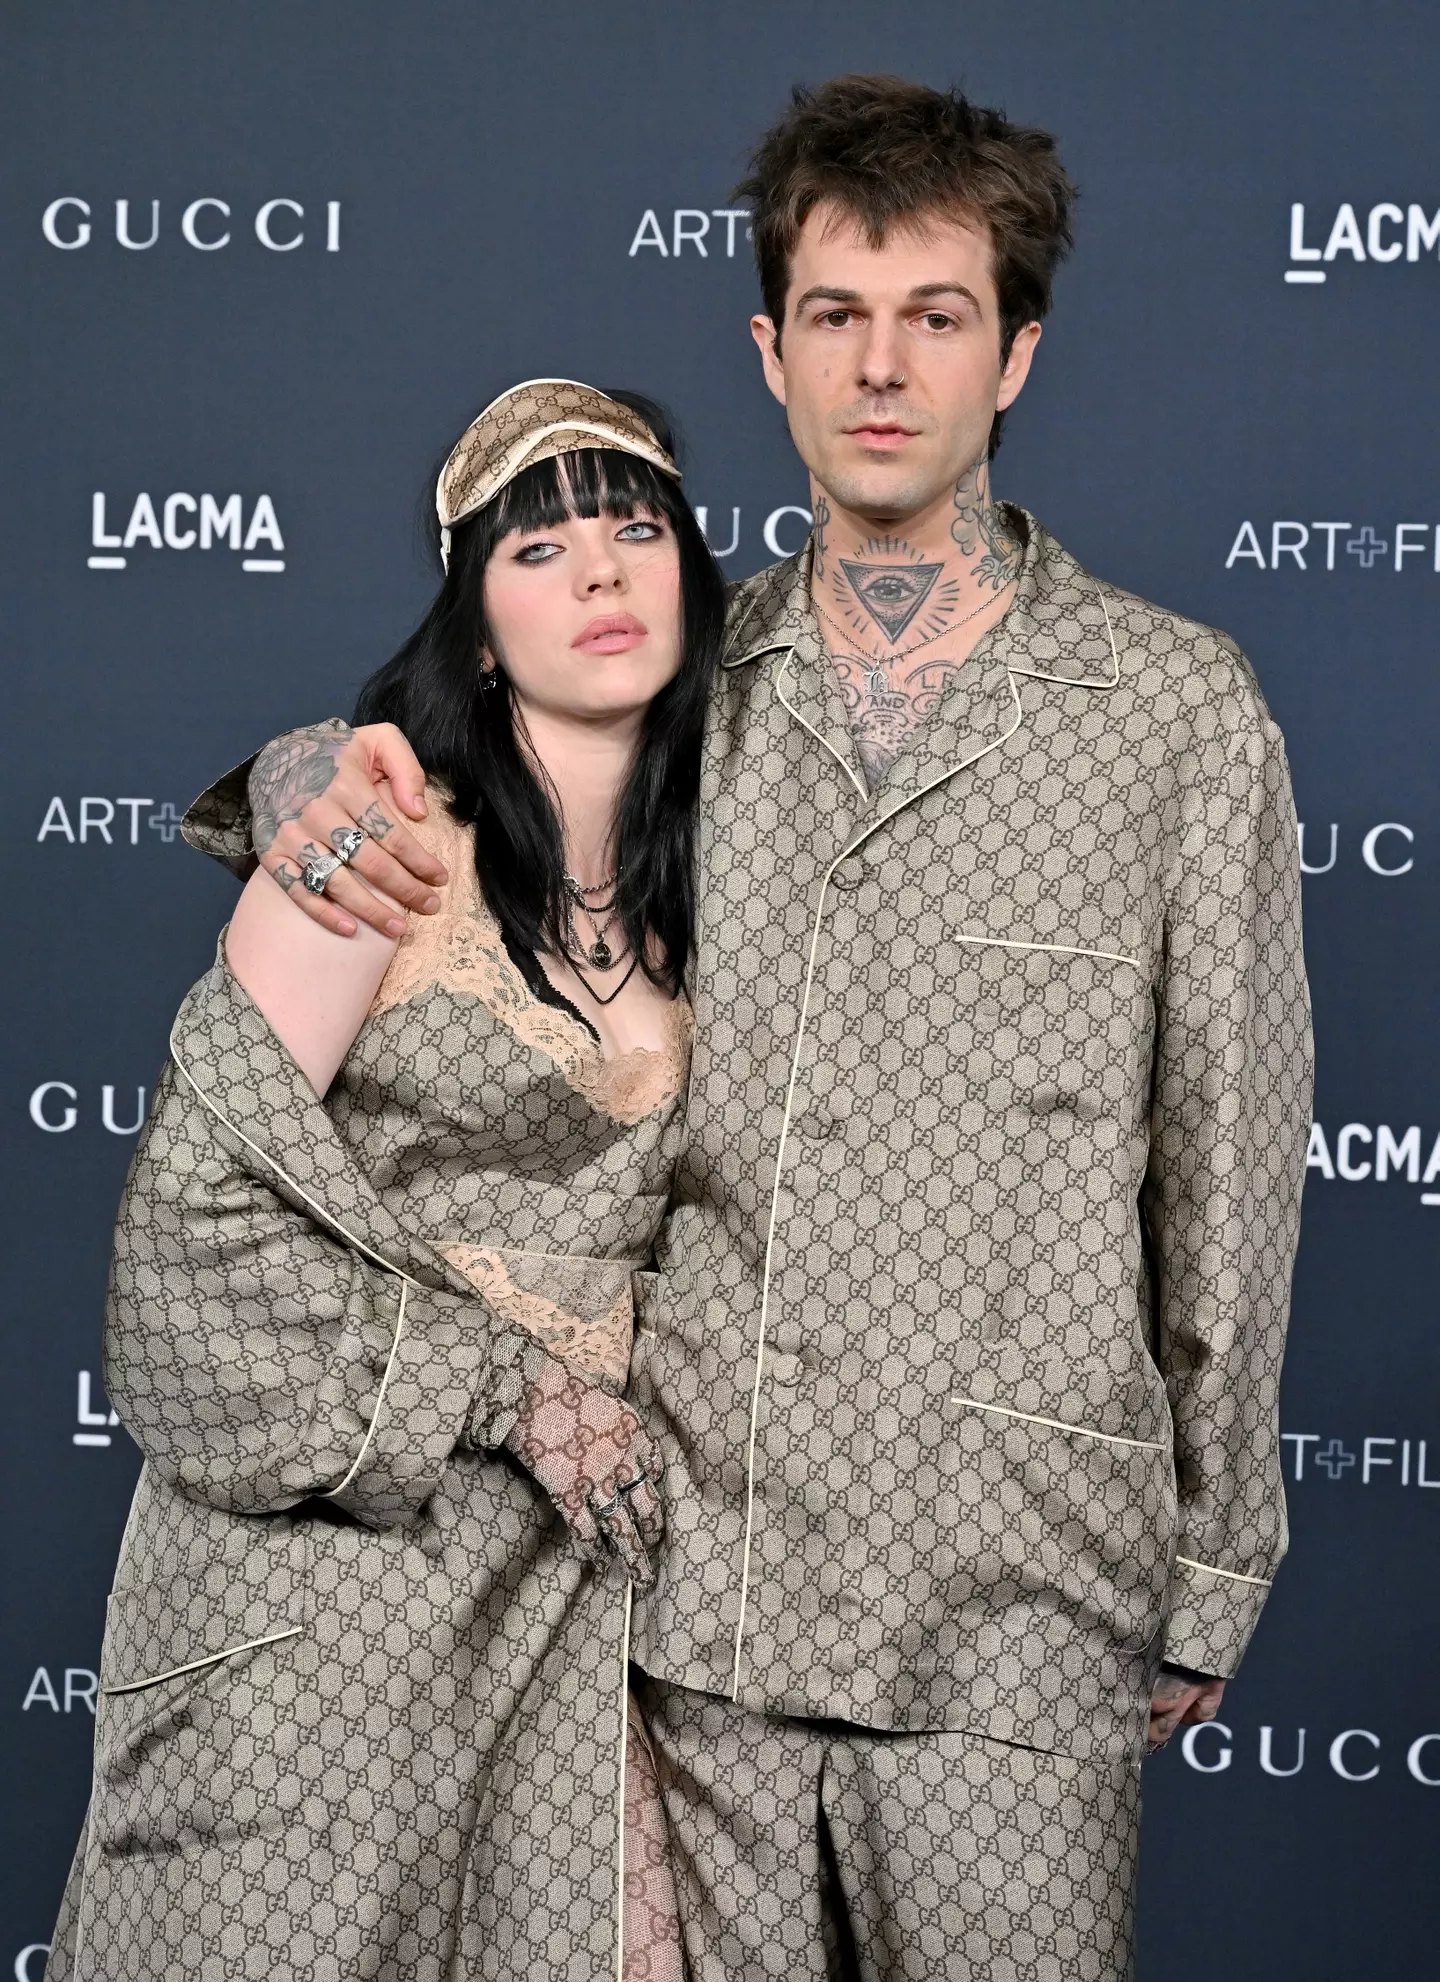 Bilie Eilish and Jesse Rutherford when they made their red carpet debut.